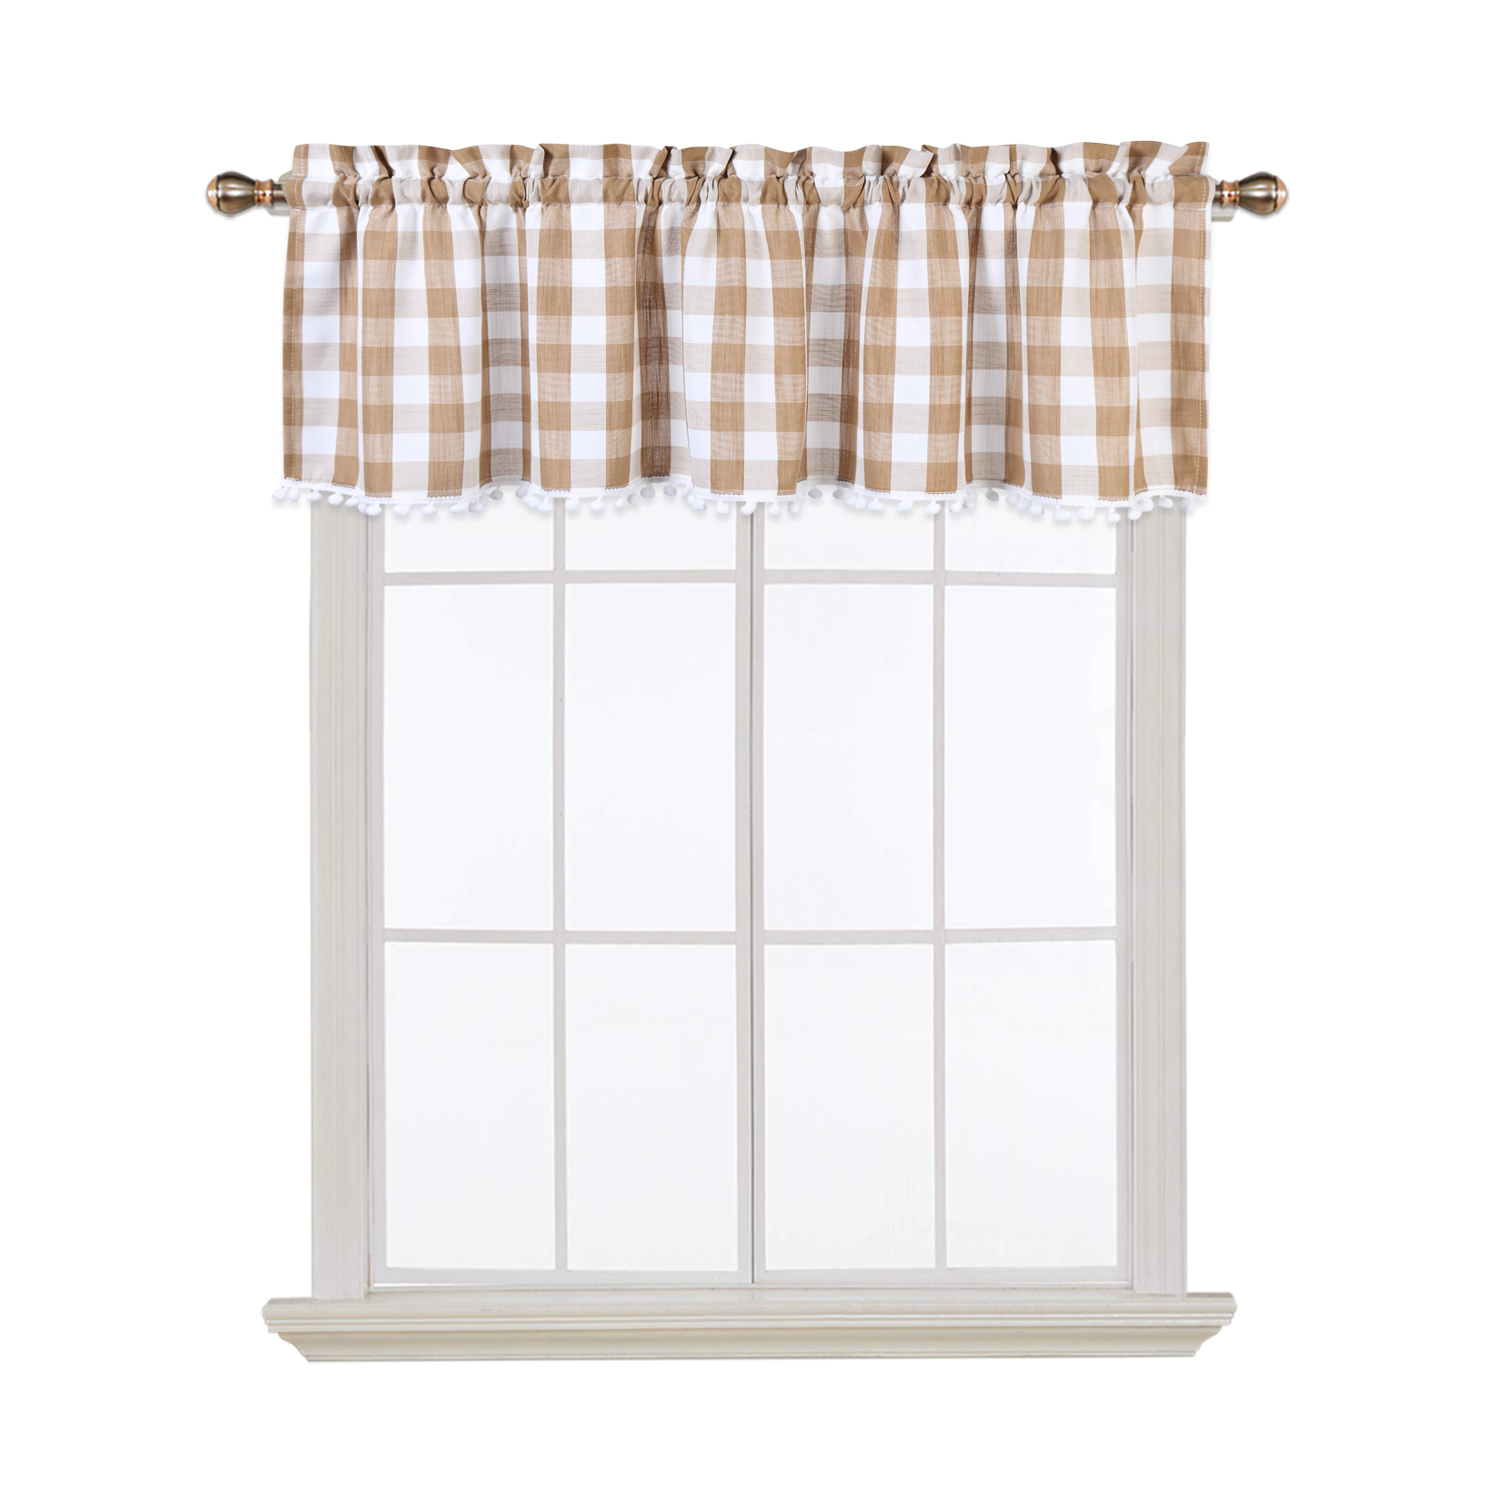 [US Direct] Rod Pocket Light Filtering 50% Polyester Valance Classic Country Farmhouse Kitchen Window Curtains Valance with Mini Ball Tassel